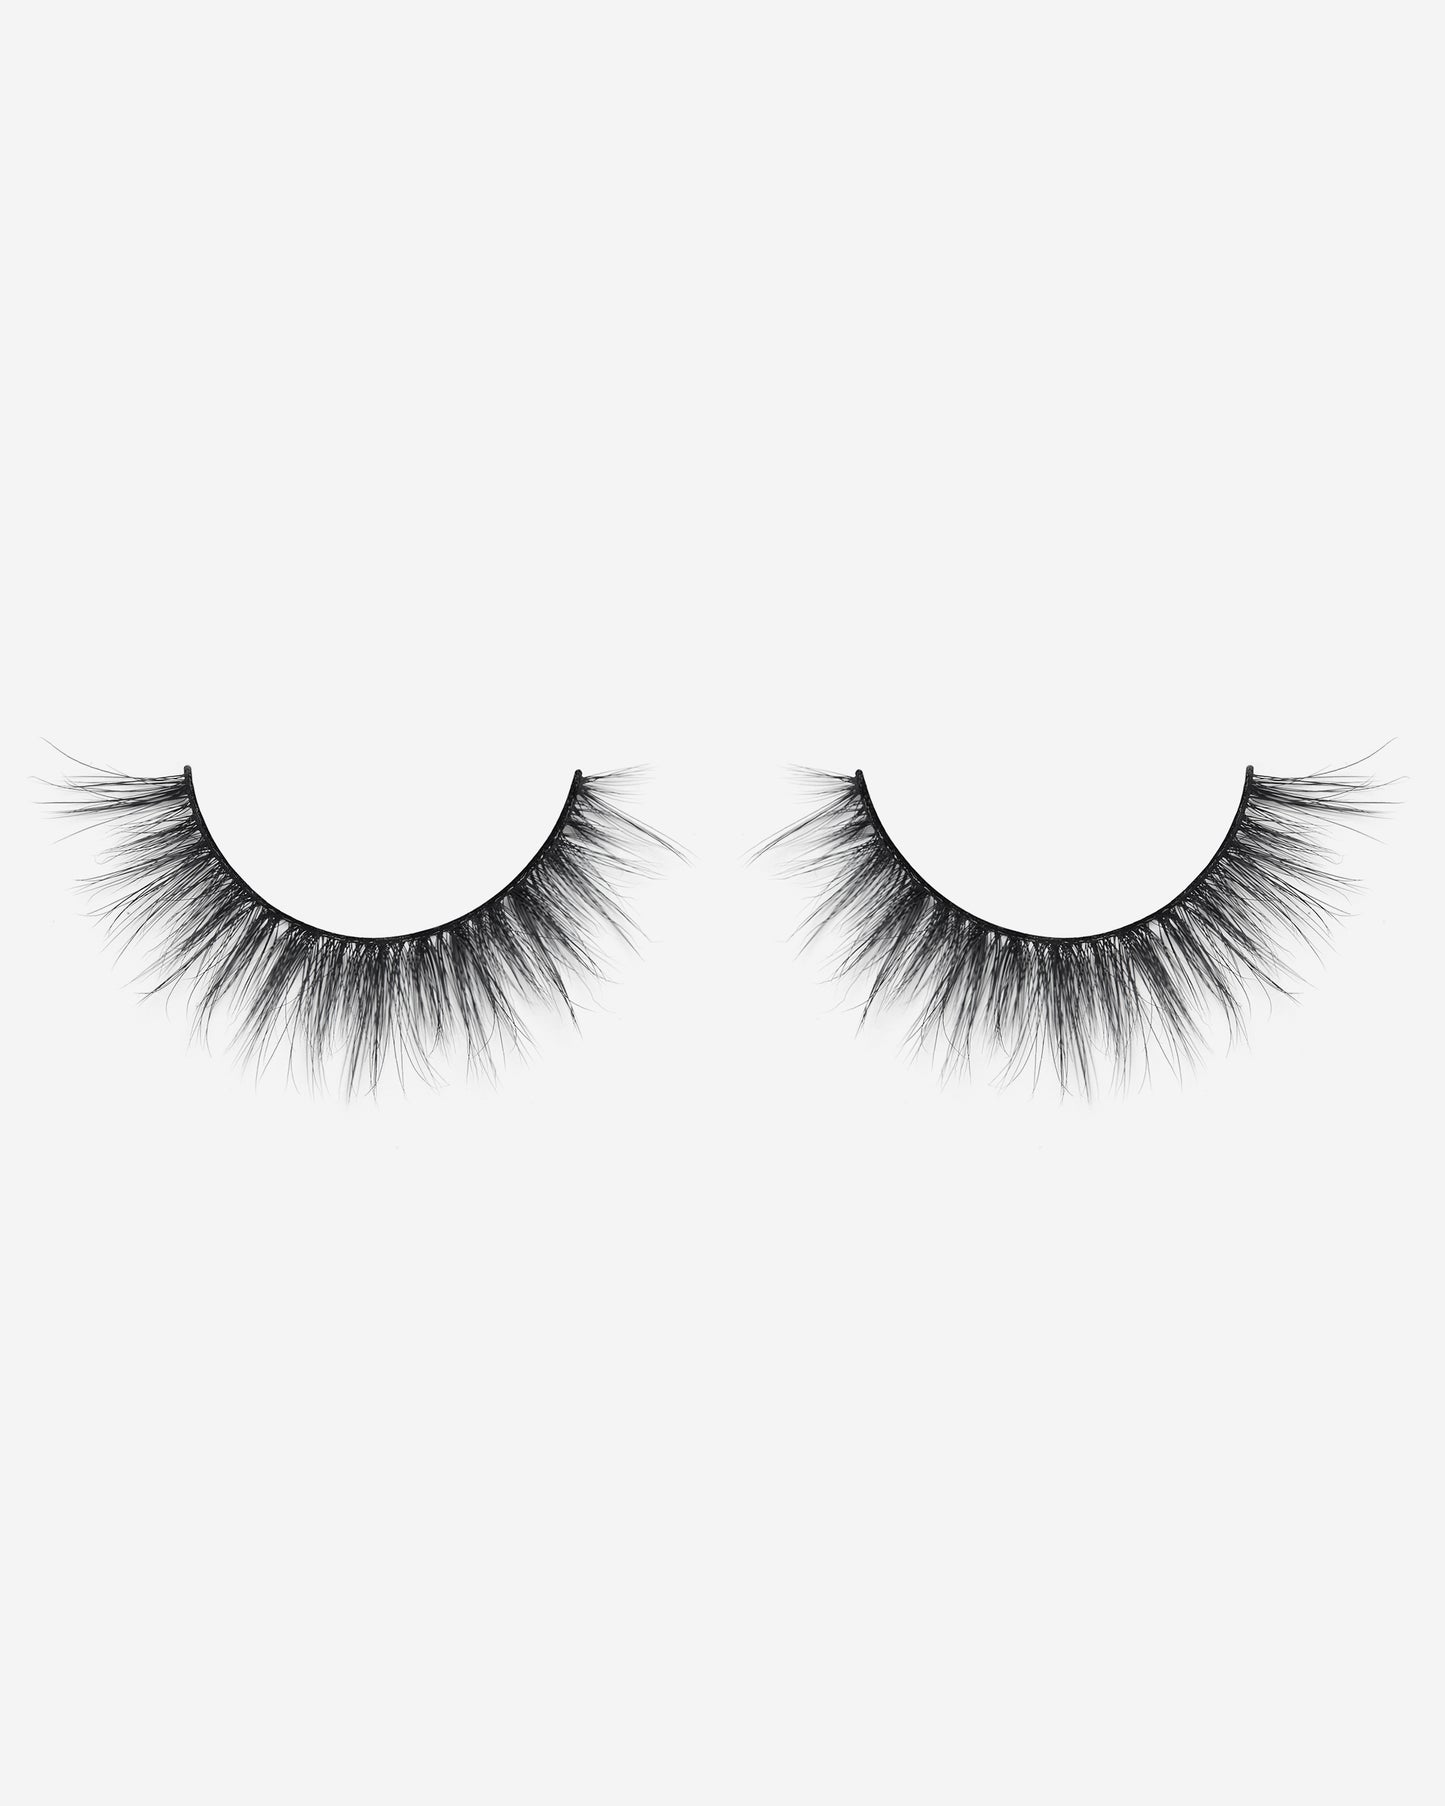 Lilly Lashes | Everyday | Blushing | Side by Side